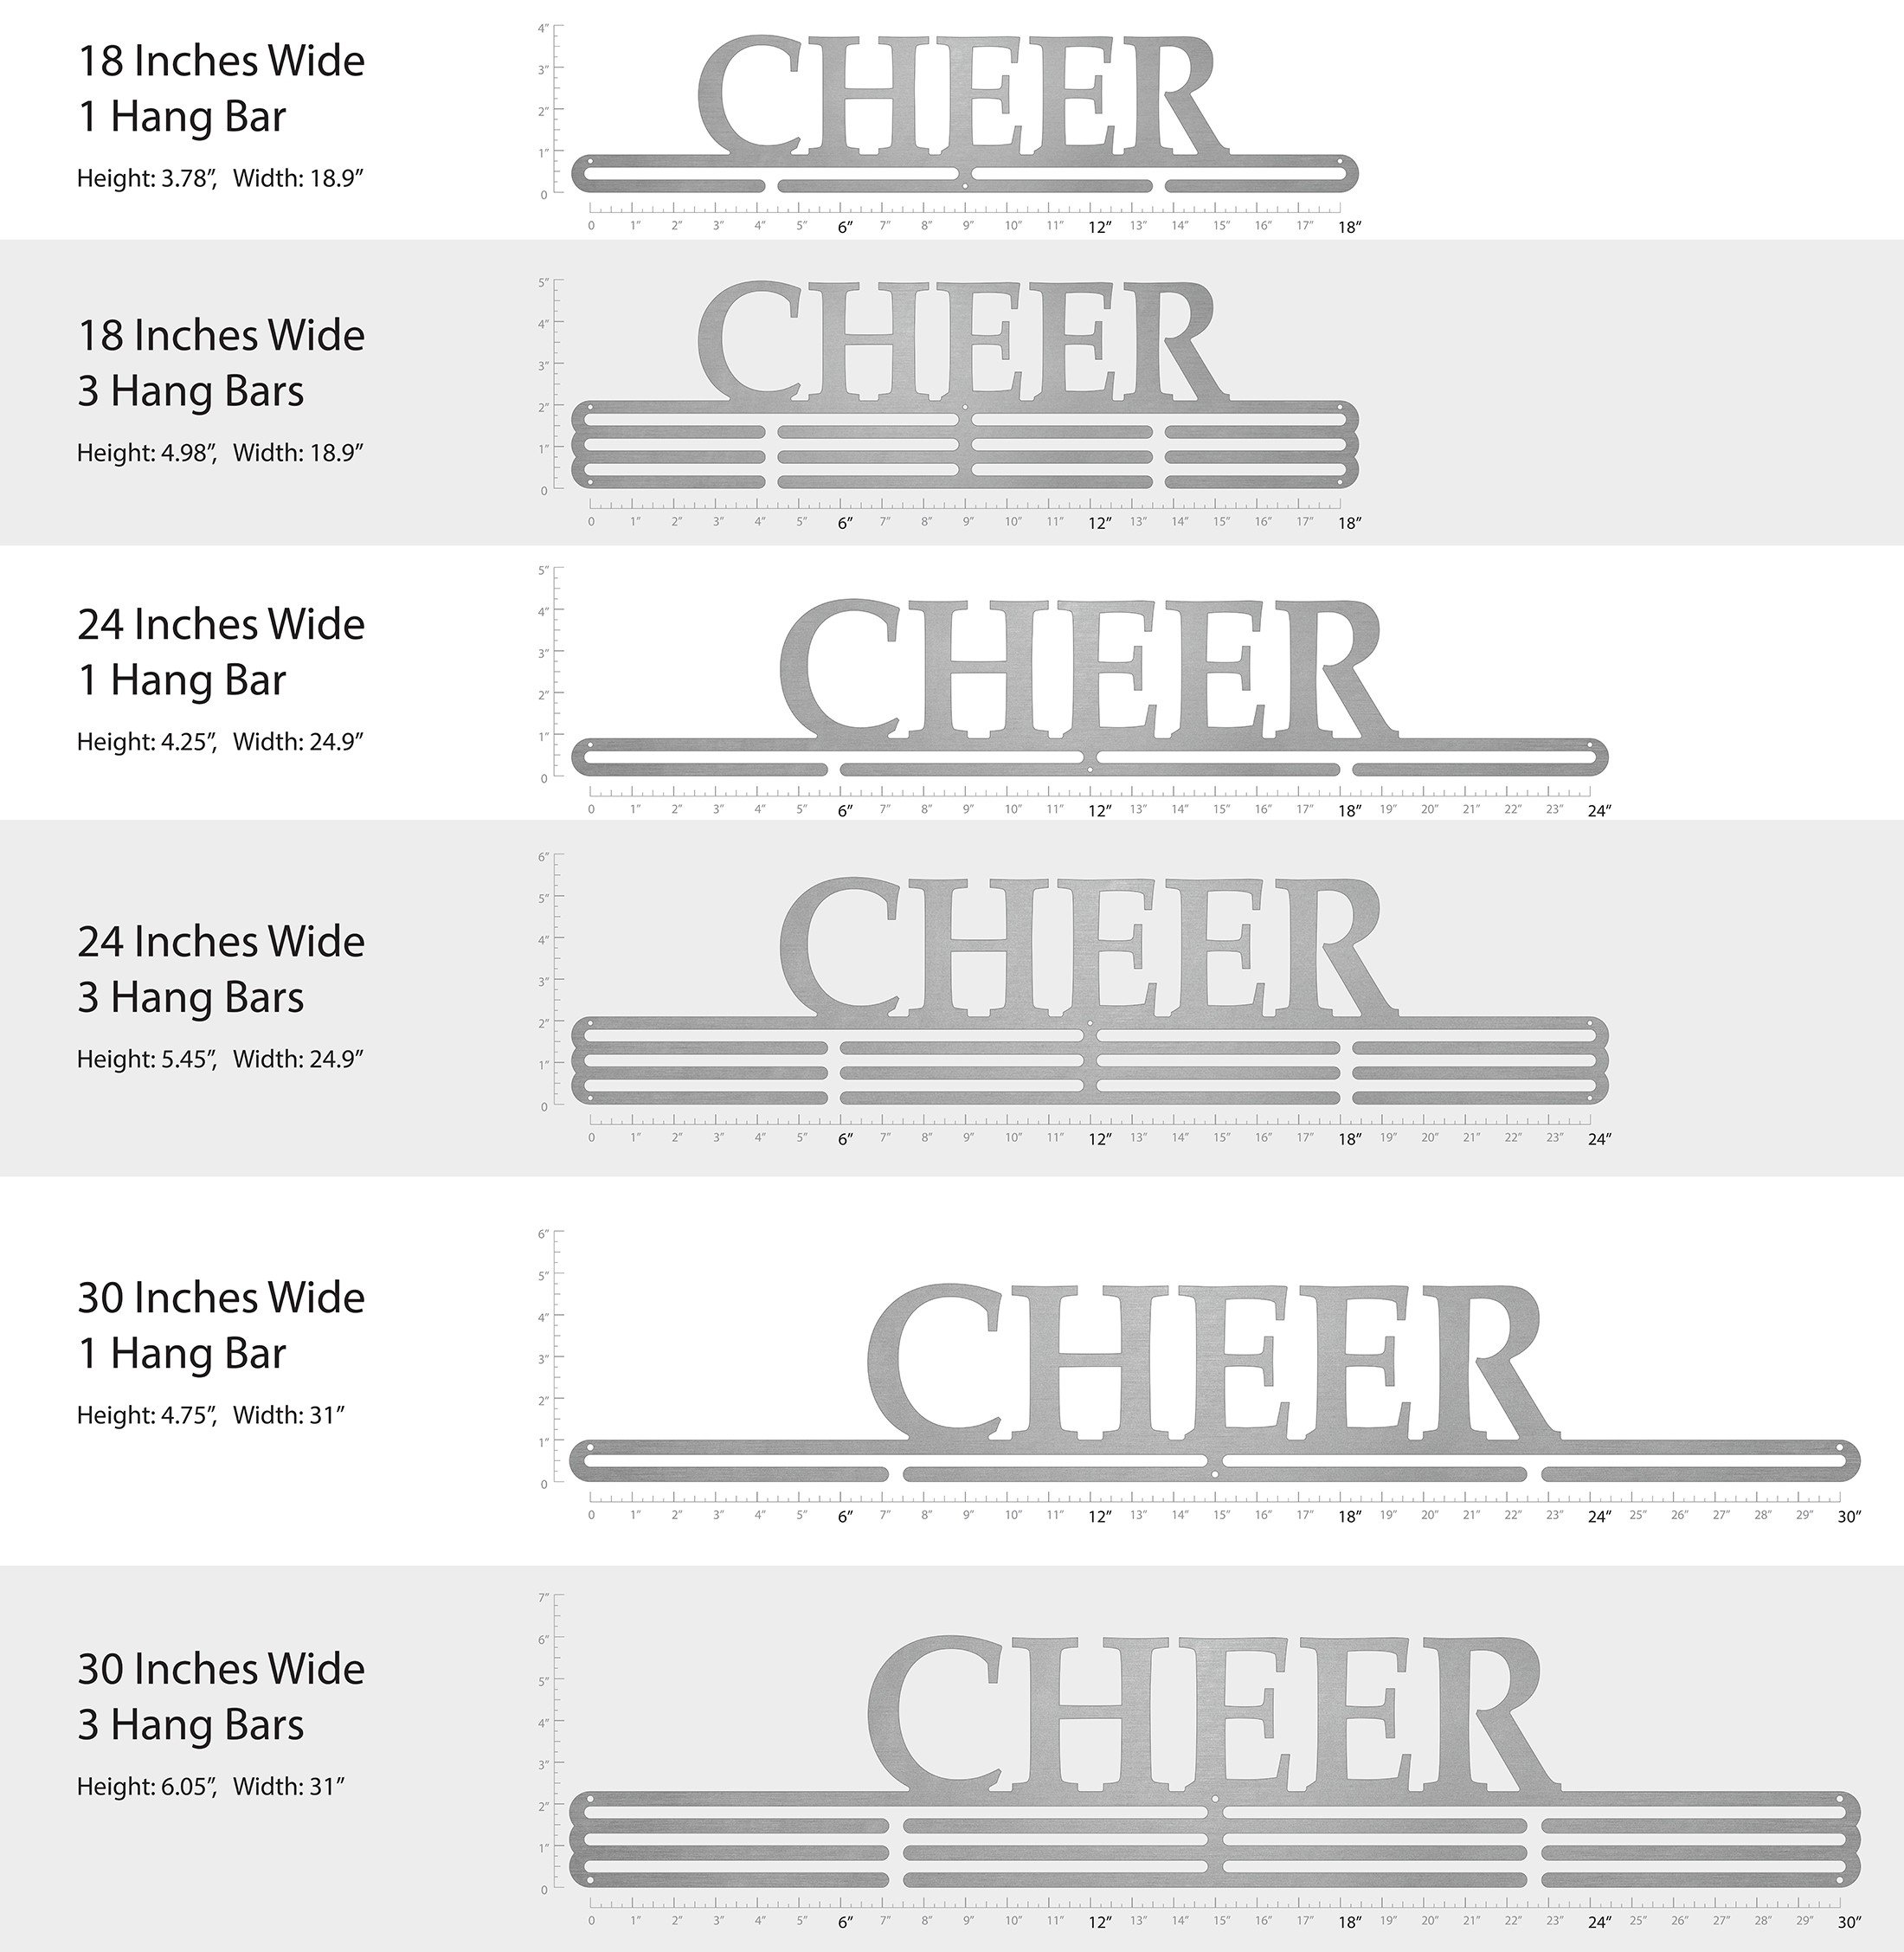 Cheer! - Text Only